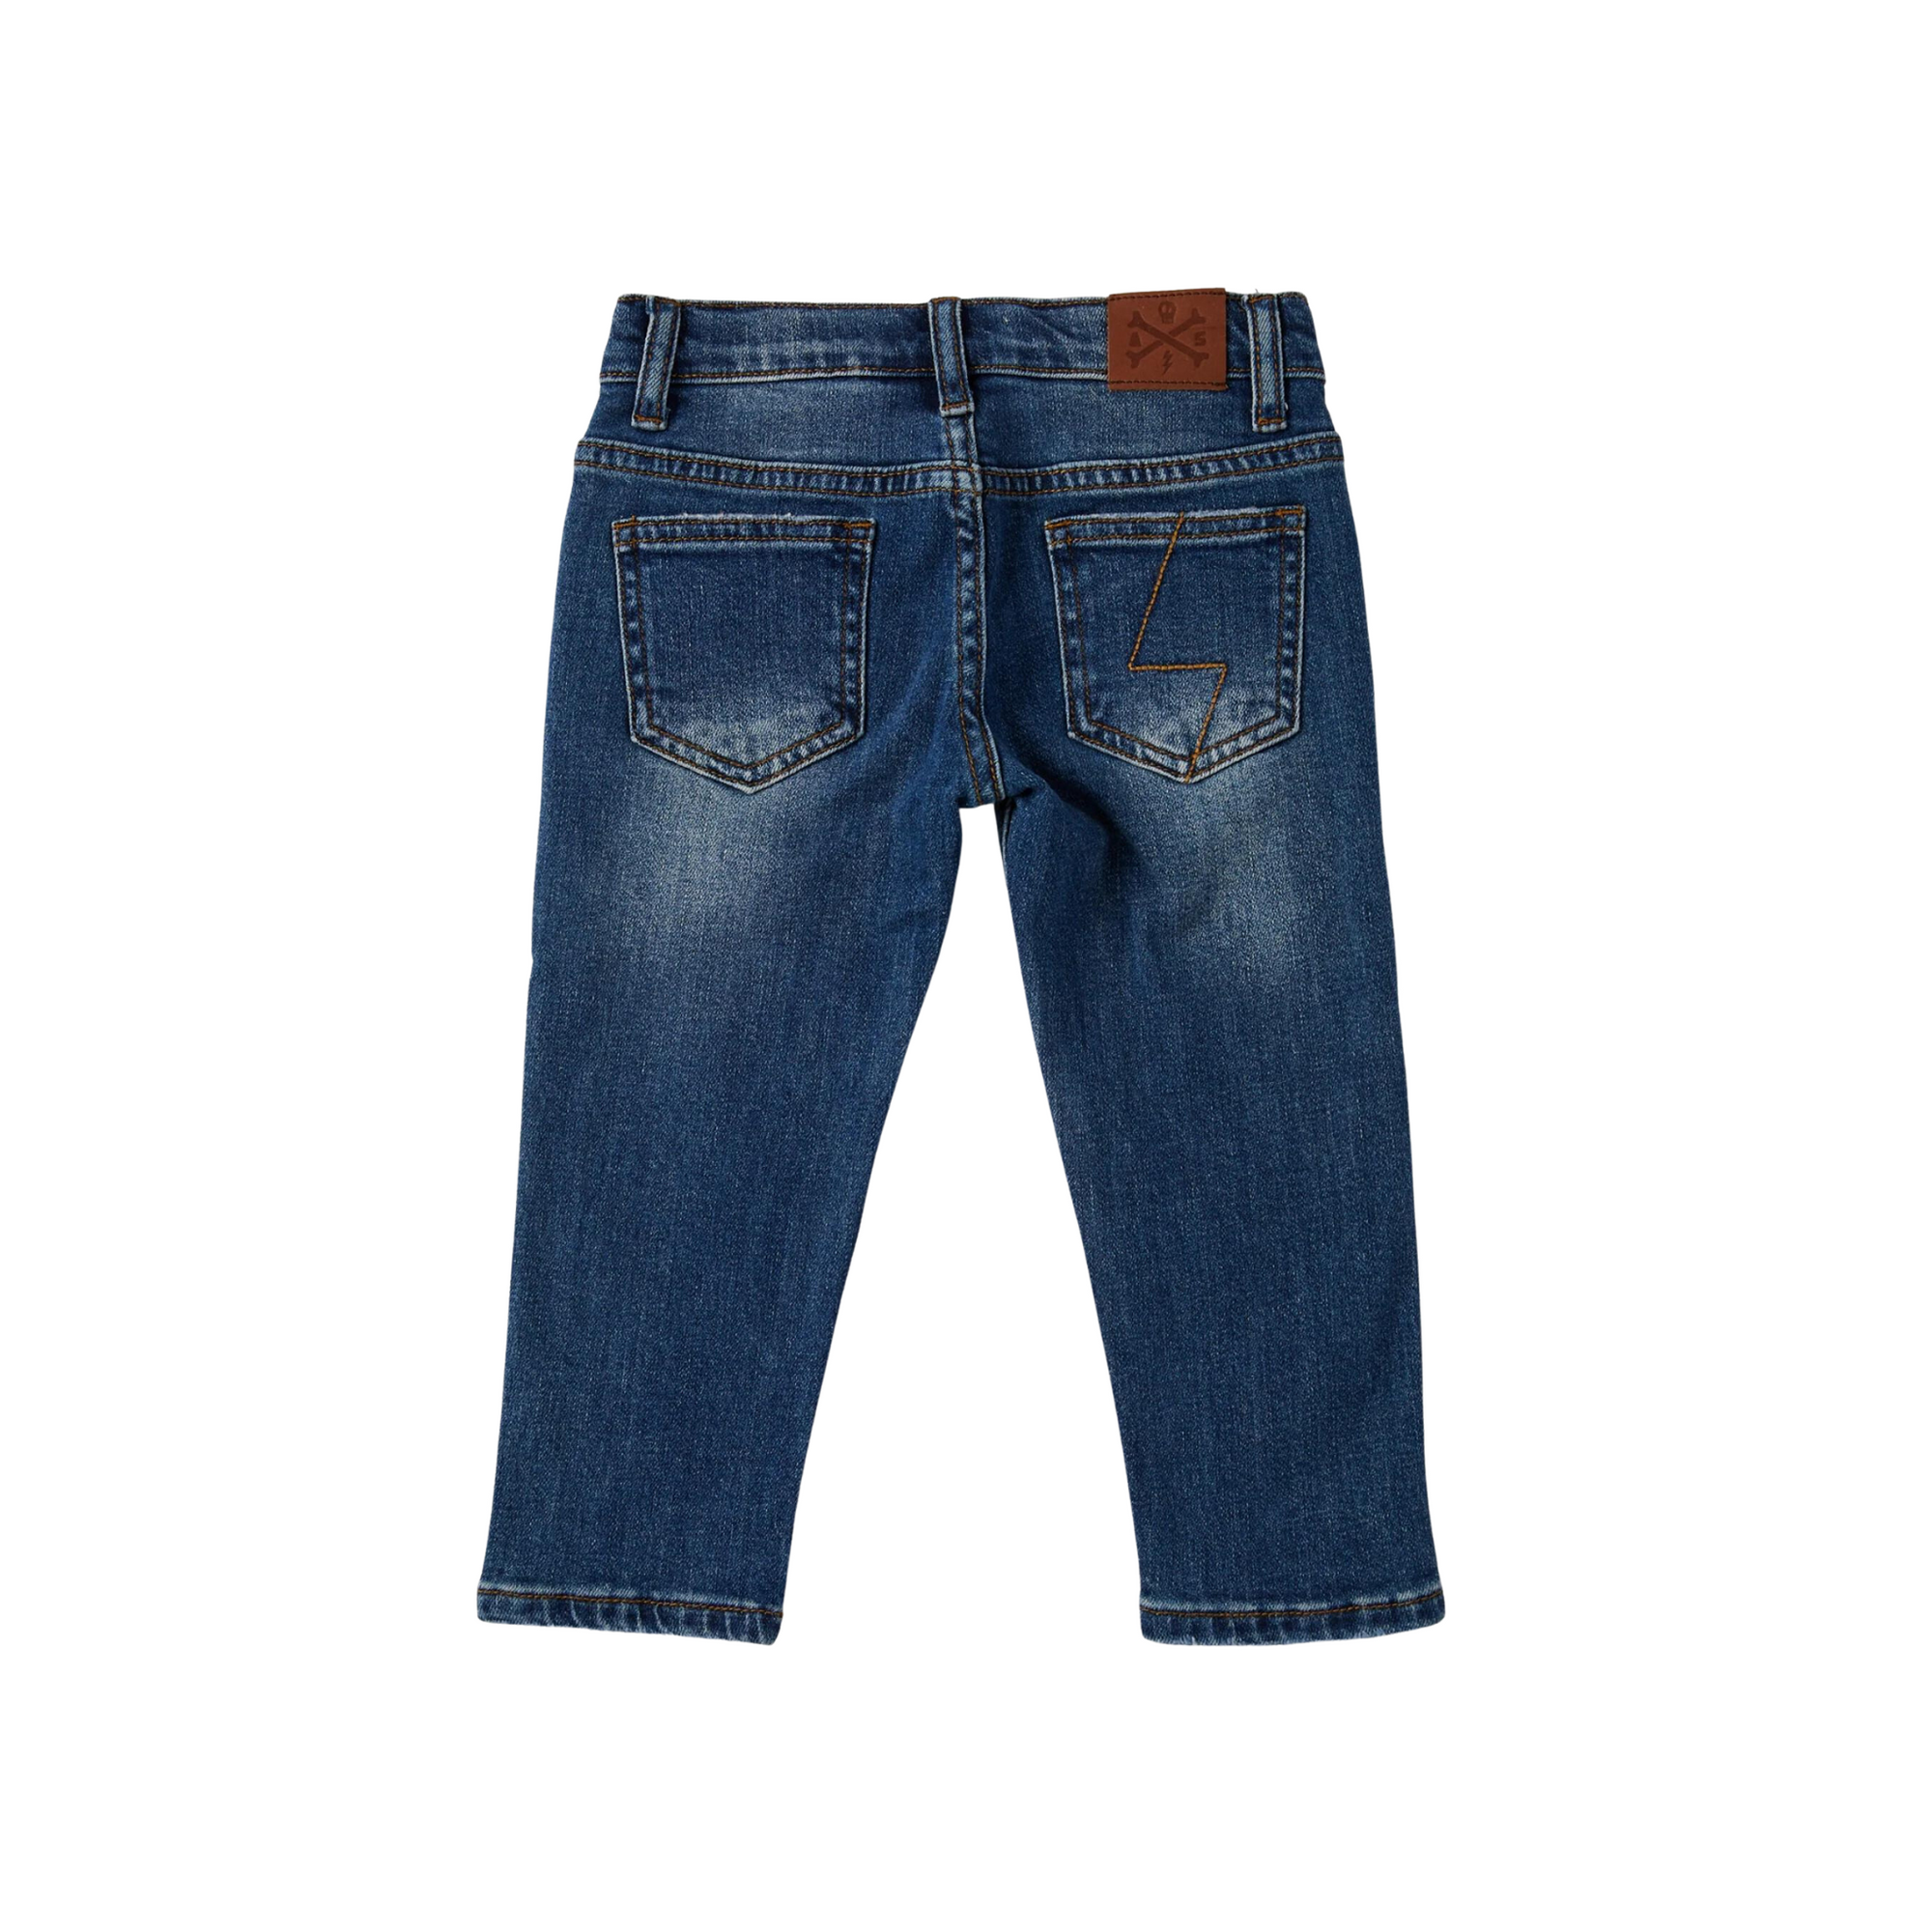 Alphabet Soup Boys Relaxed Jeans - Mid Blue